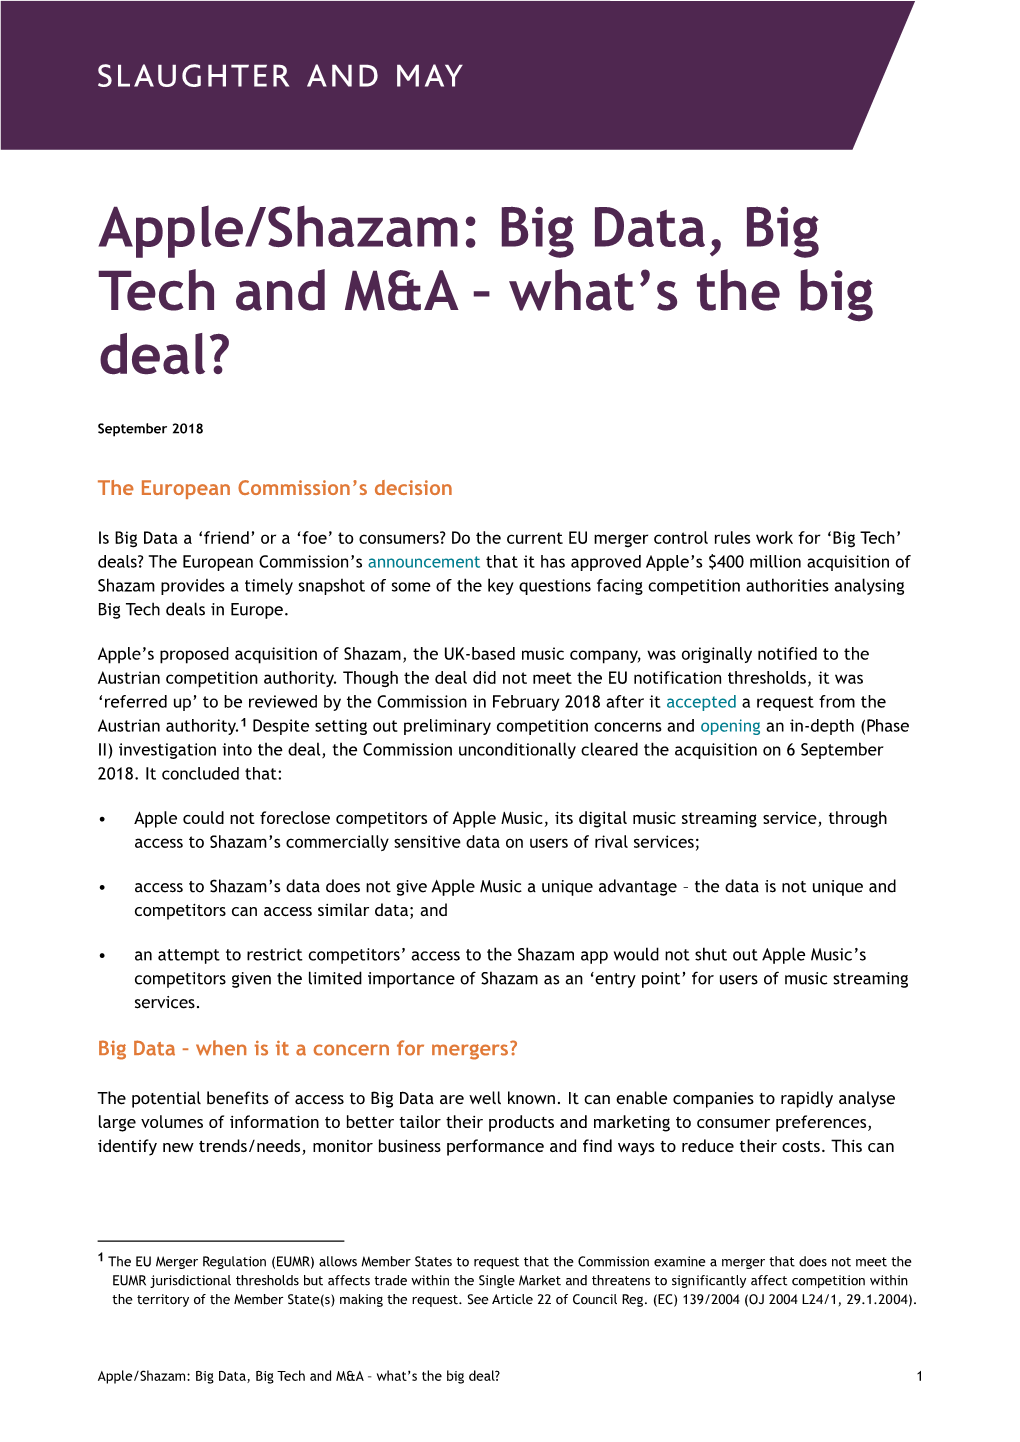 Apple/Shazam: Big Data, Big Tech and M&A – What's the Big Deal?